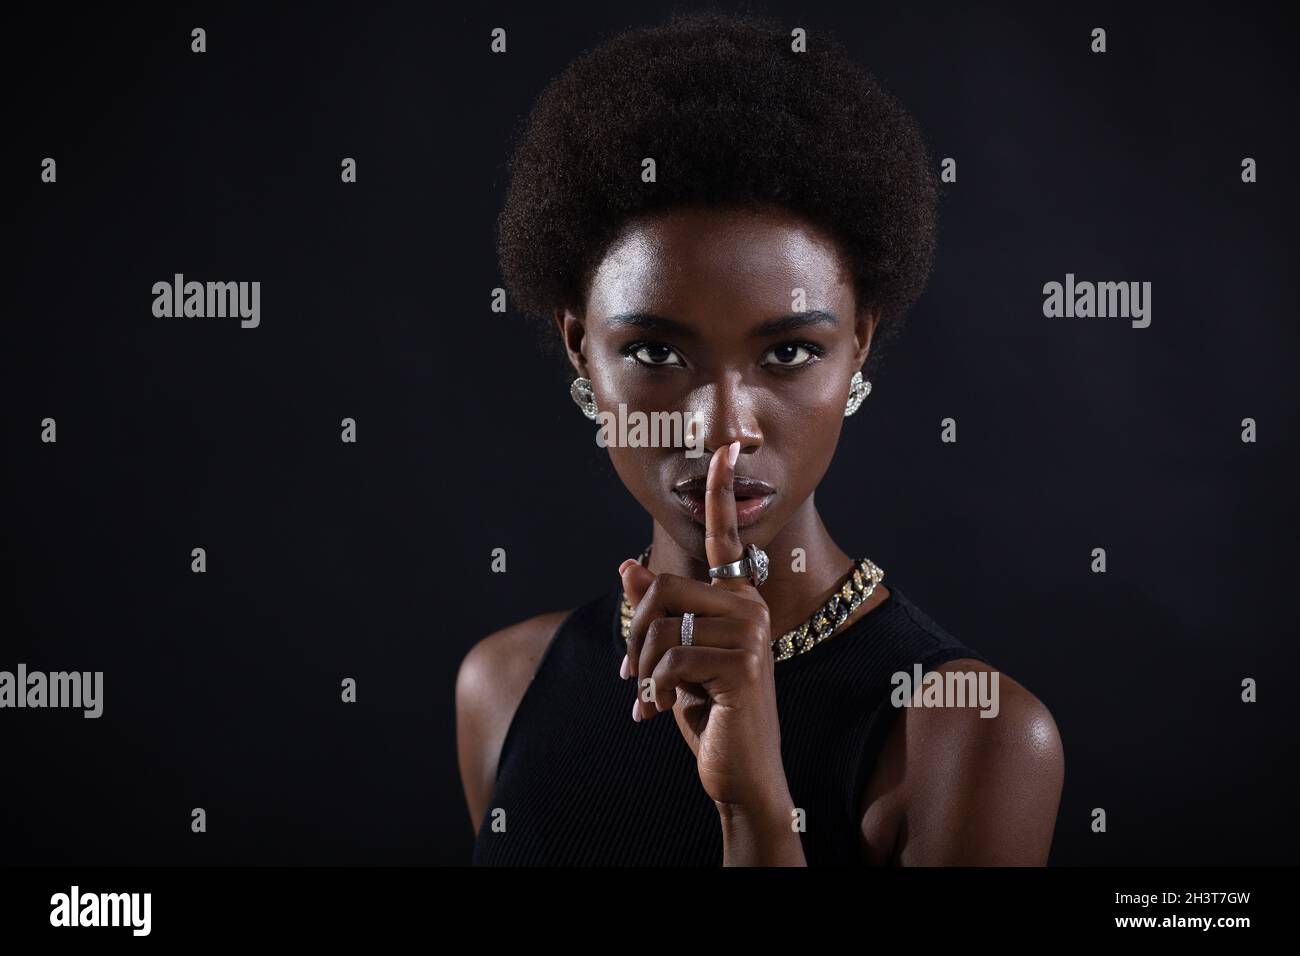 Closeup of beautiful young dark-skinned woman with finger on her lips showing shhh silence gesture on black background. Stock Photo